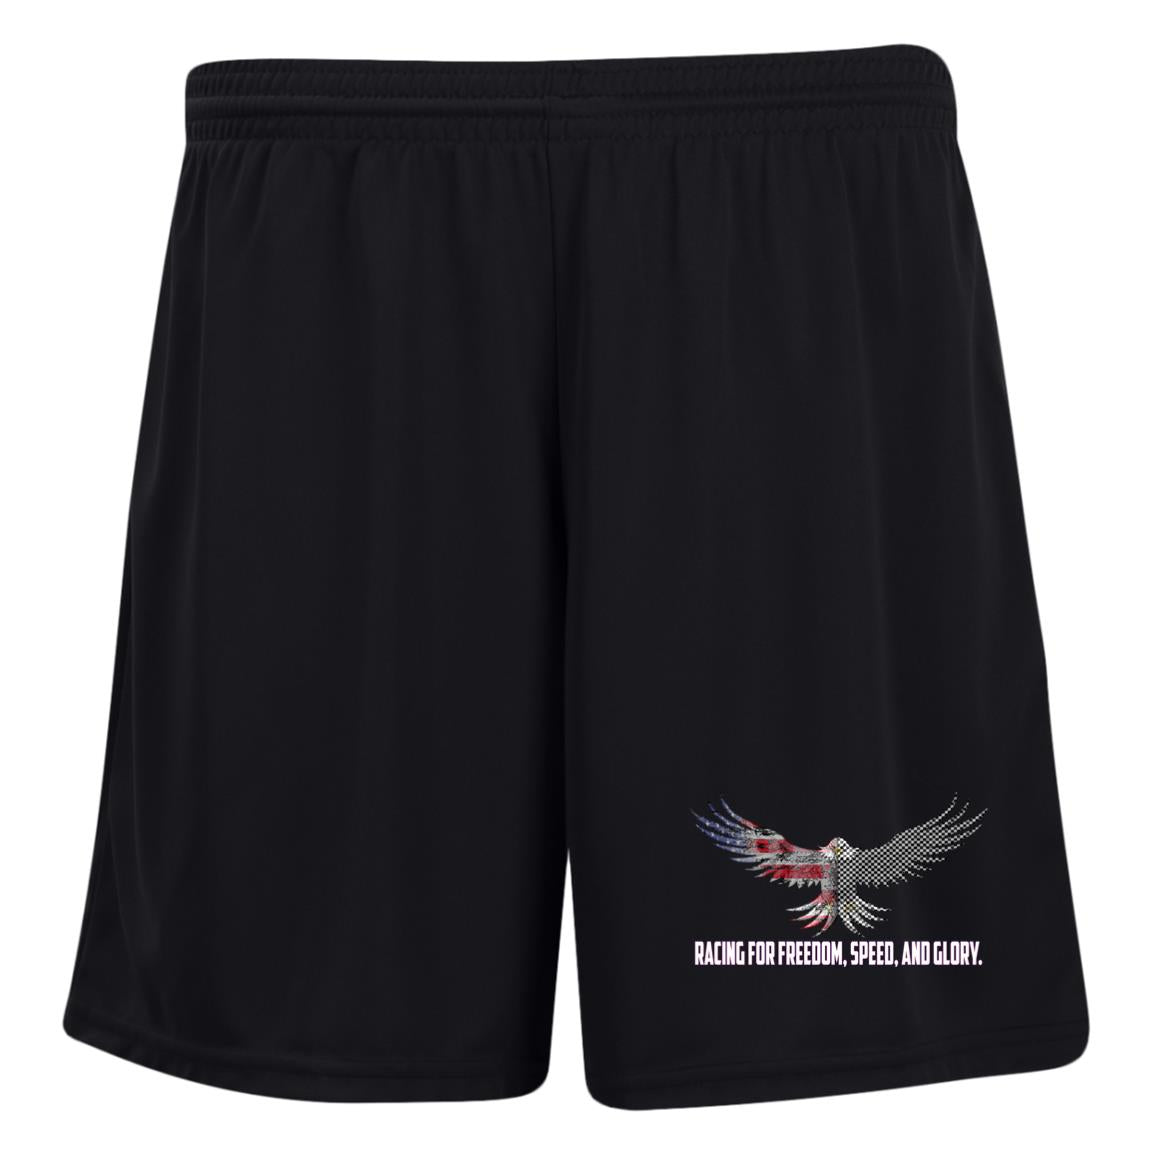 Racing For Freedom, Speed, And Glory Ladies' Moisture-Wicking 7 inch Inseam Training Shorts